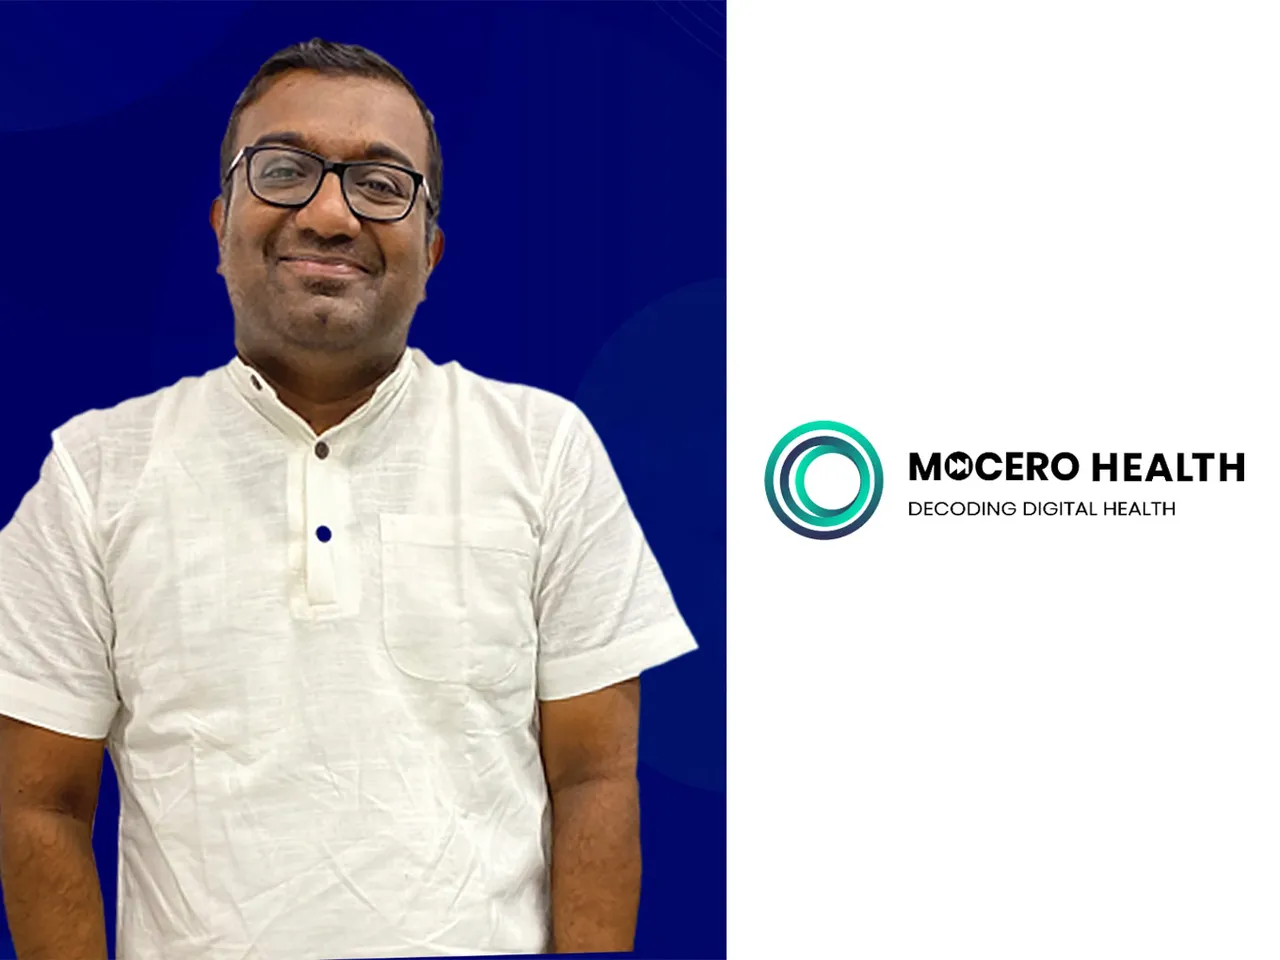 Health tech startup Mocero Health raises Rs 1.3Cr in a seed round led by Inflection Point Ventures